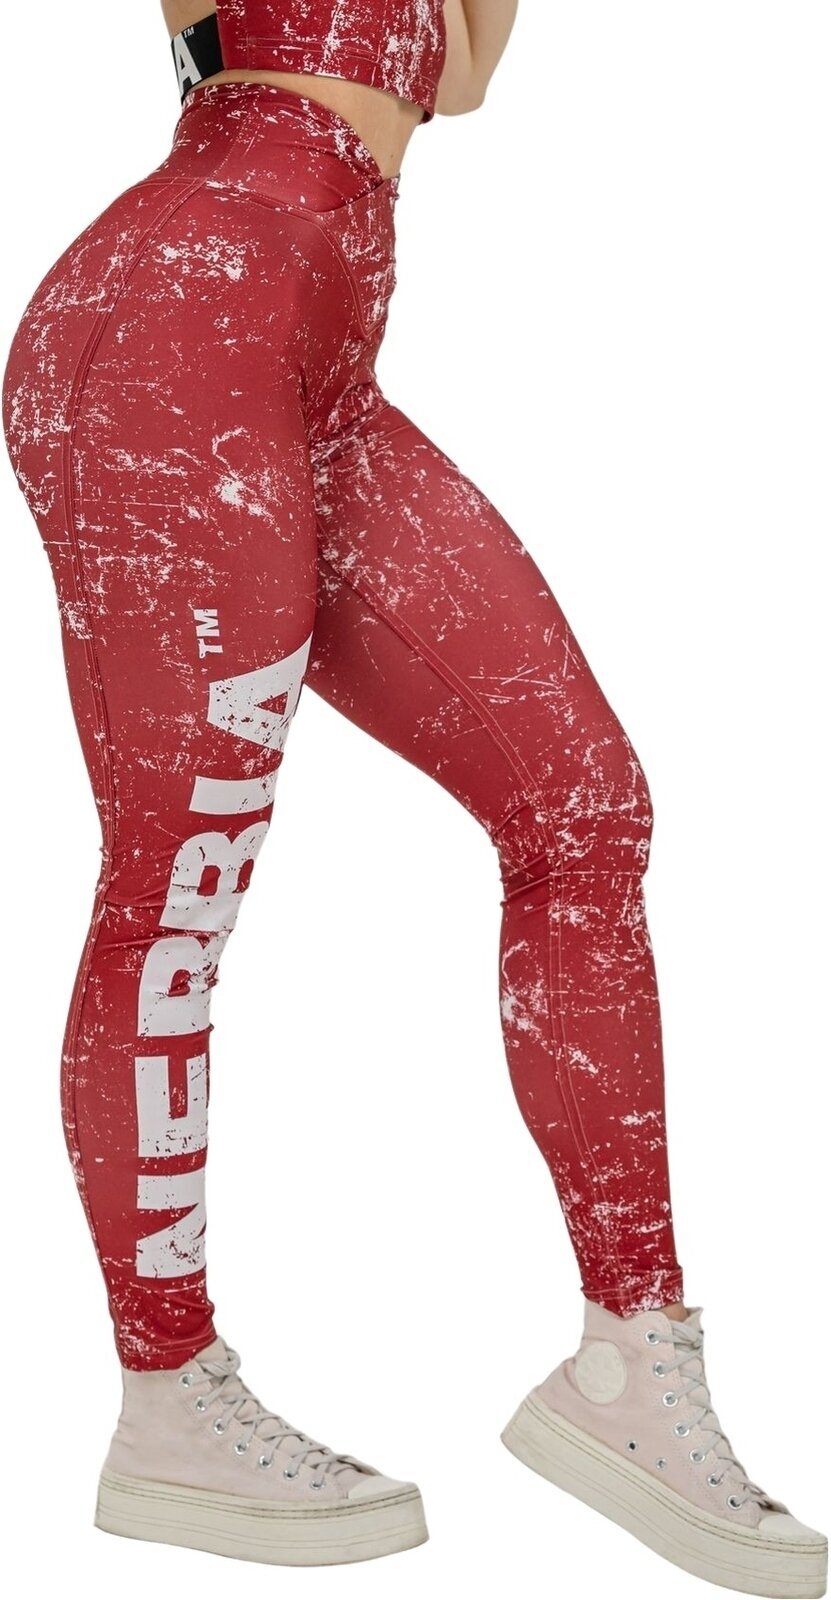 Fitness Hose Nebbia Workout Leggings Rough Girl Red M Fitness Hose